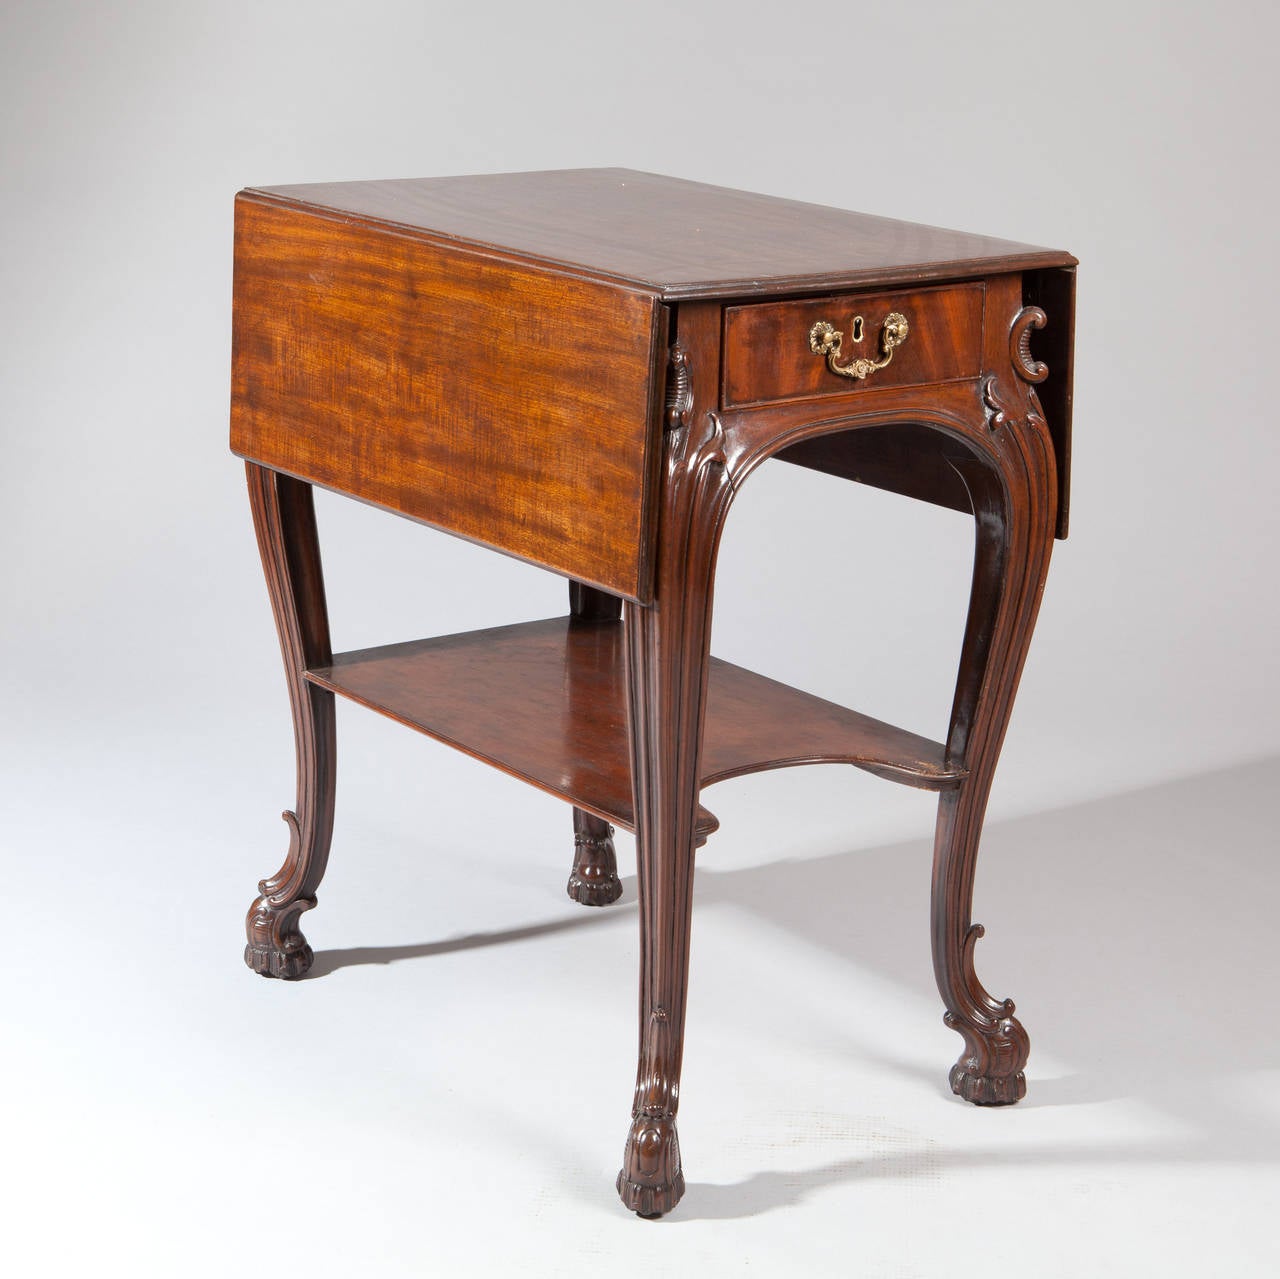 The rectangular twin-flap top above a mahogany-lined frieze drawer, the reverse with a simulated drawer, on carved cabriole legs headed by foliate carving, with a concave-sided shallow-galleried undertier inswept at the front, on elaborate carved